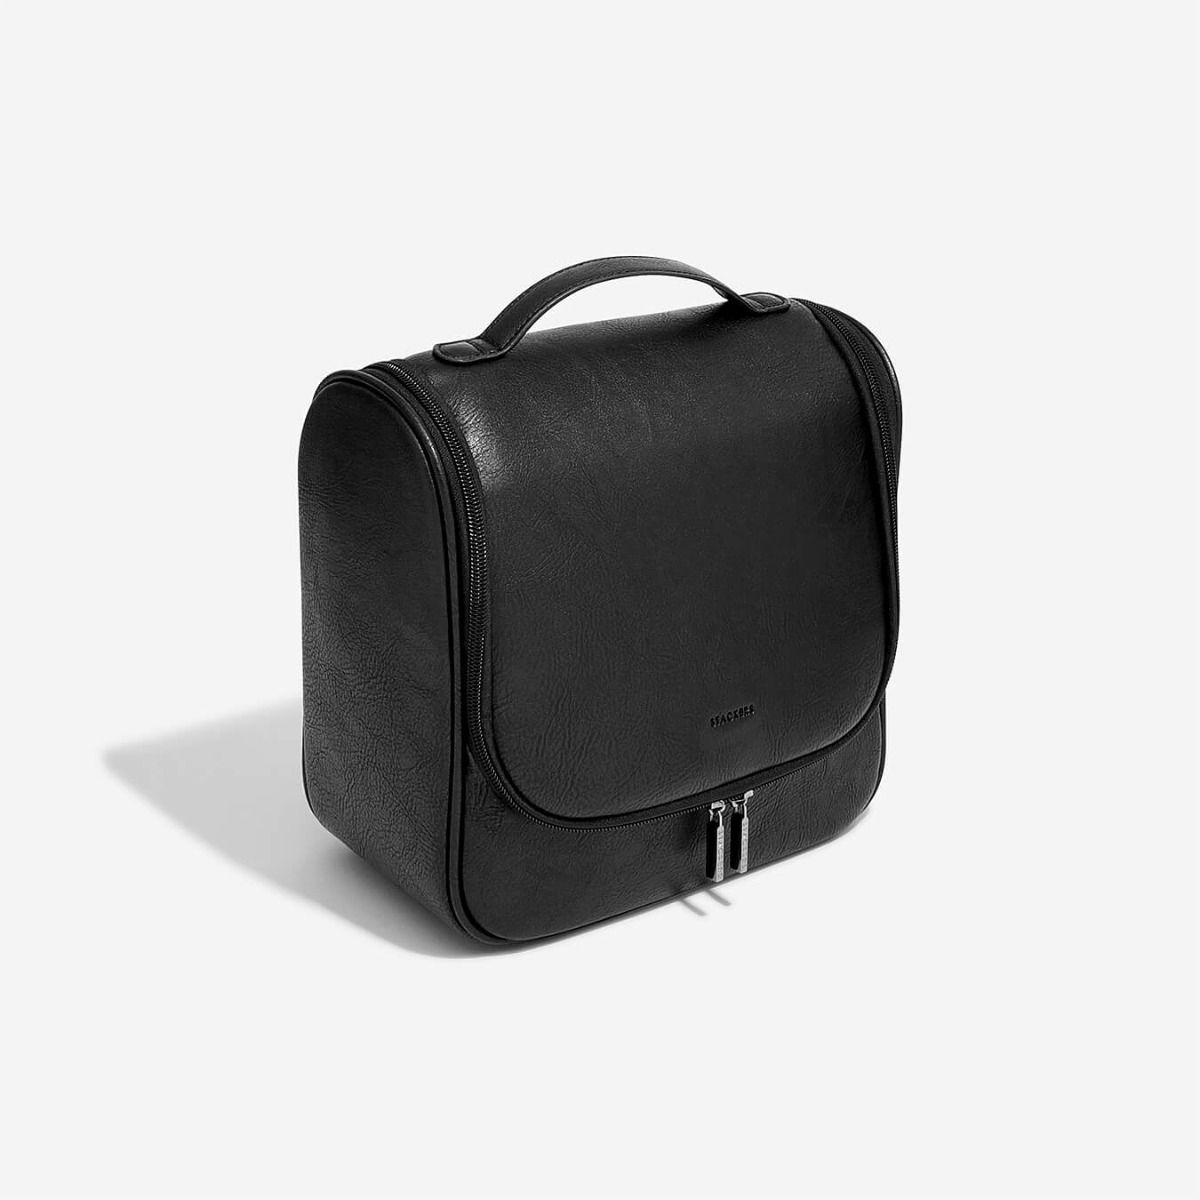 Stackers Men's Hanging Wash Bag - Black - Holiday Accent Ltd